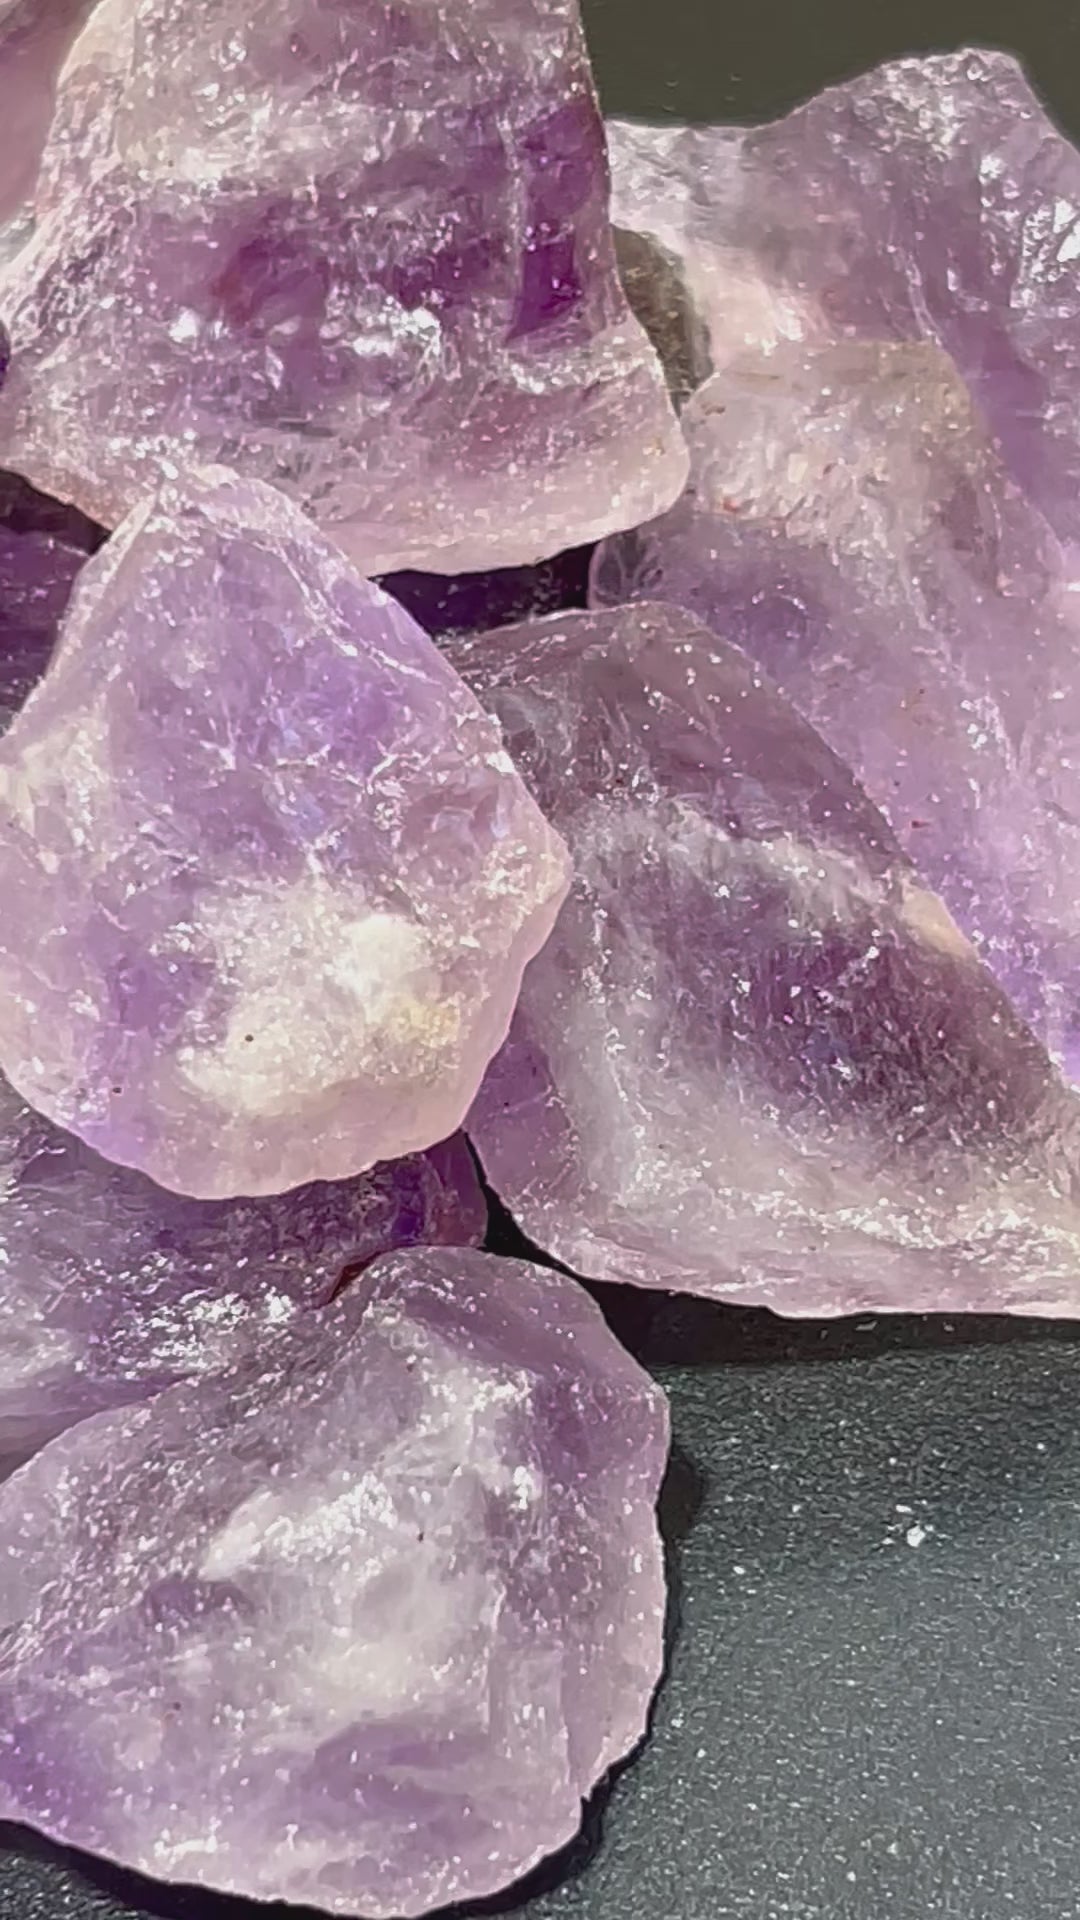 Amethyst Crystal Rough (1 LB) One Pound Bulk Wholesale Lot Raw Natural Gemstones Healing Crystals And Stones